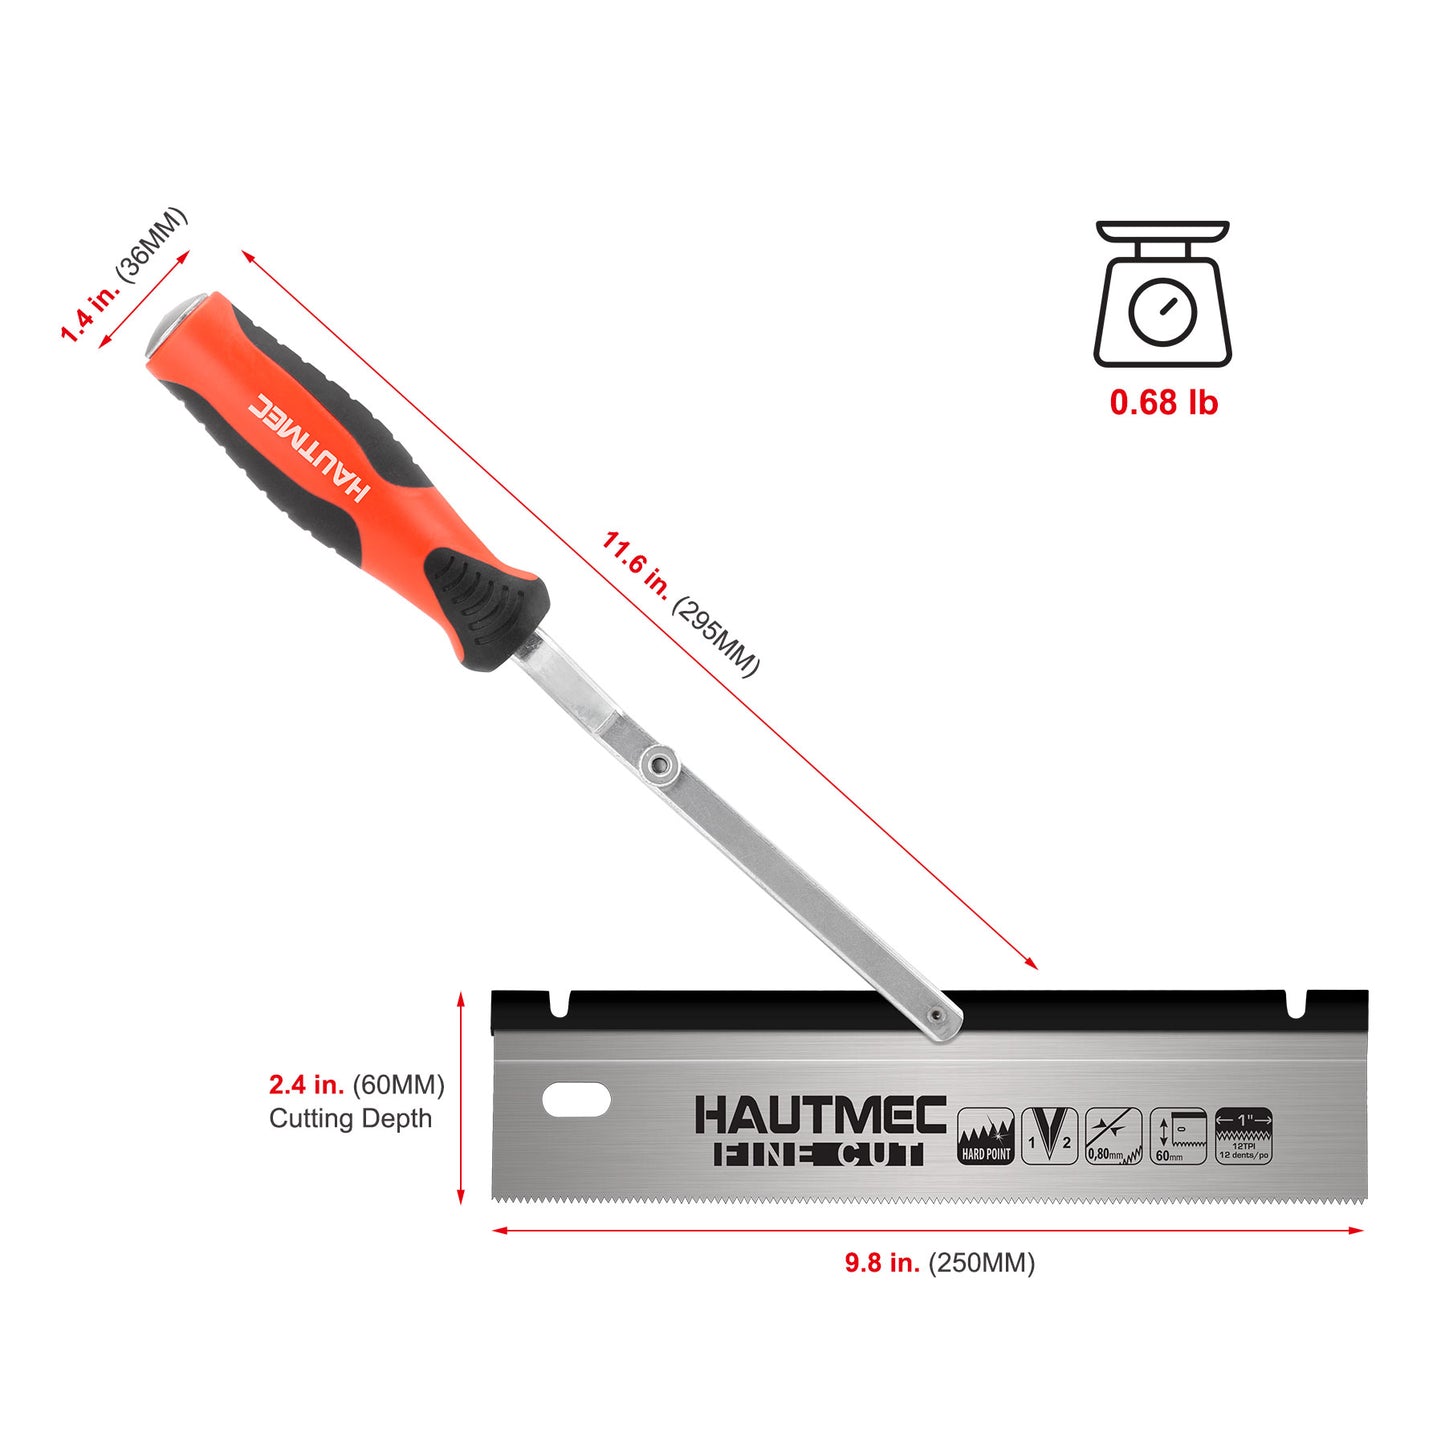 HAUTMEC 10" Reversible Dovetail/Jamb Saw, 12TPI Double Ground Teeth with Spring Loaded Design & Cranked Soft Handle for flush-cutting door jambs and millwork for tile installation and prep